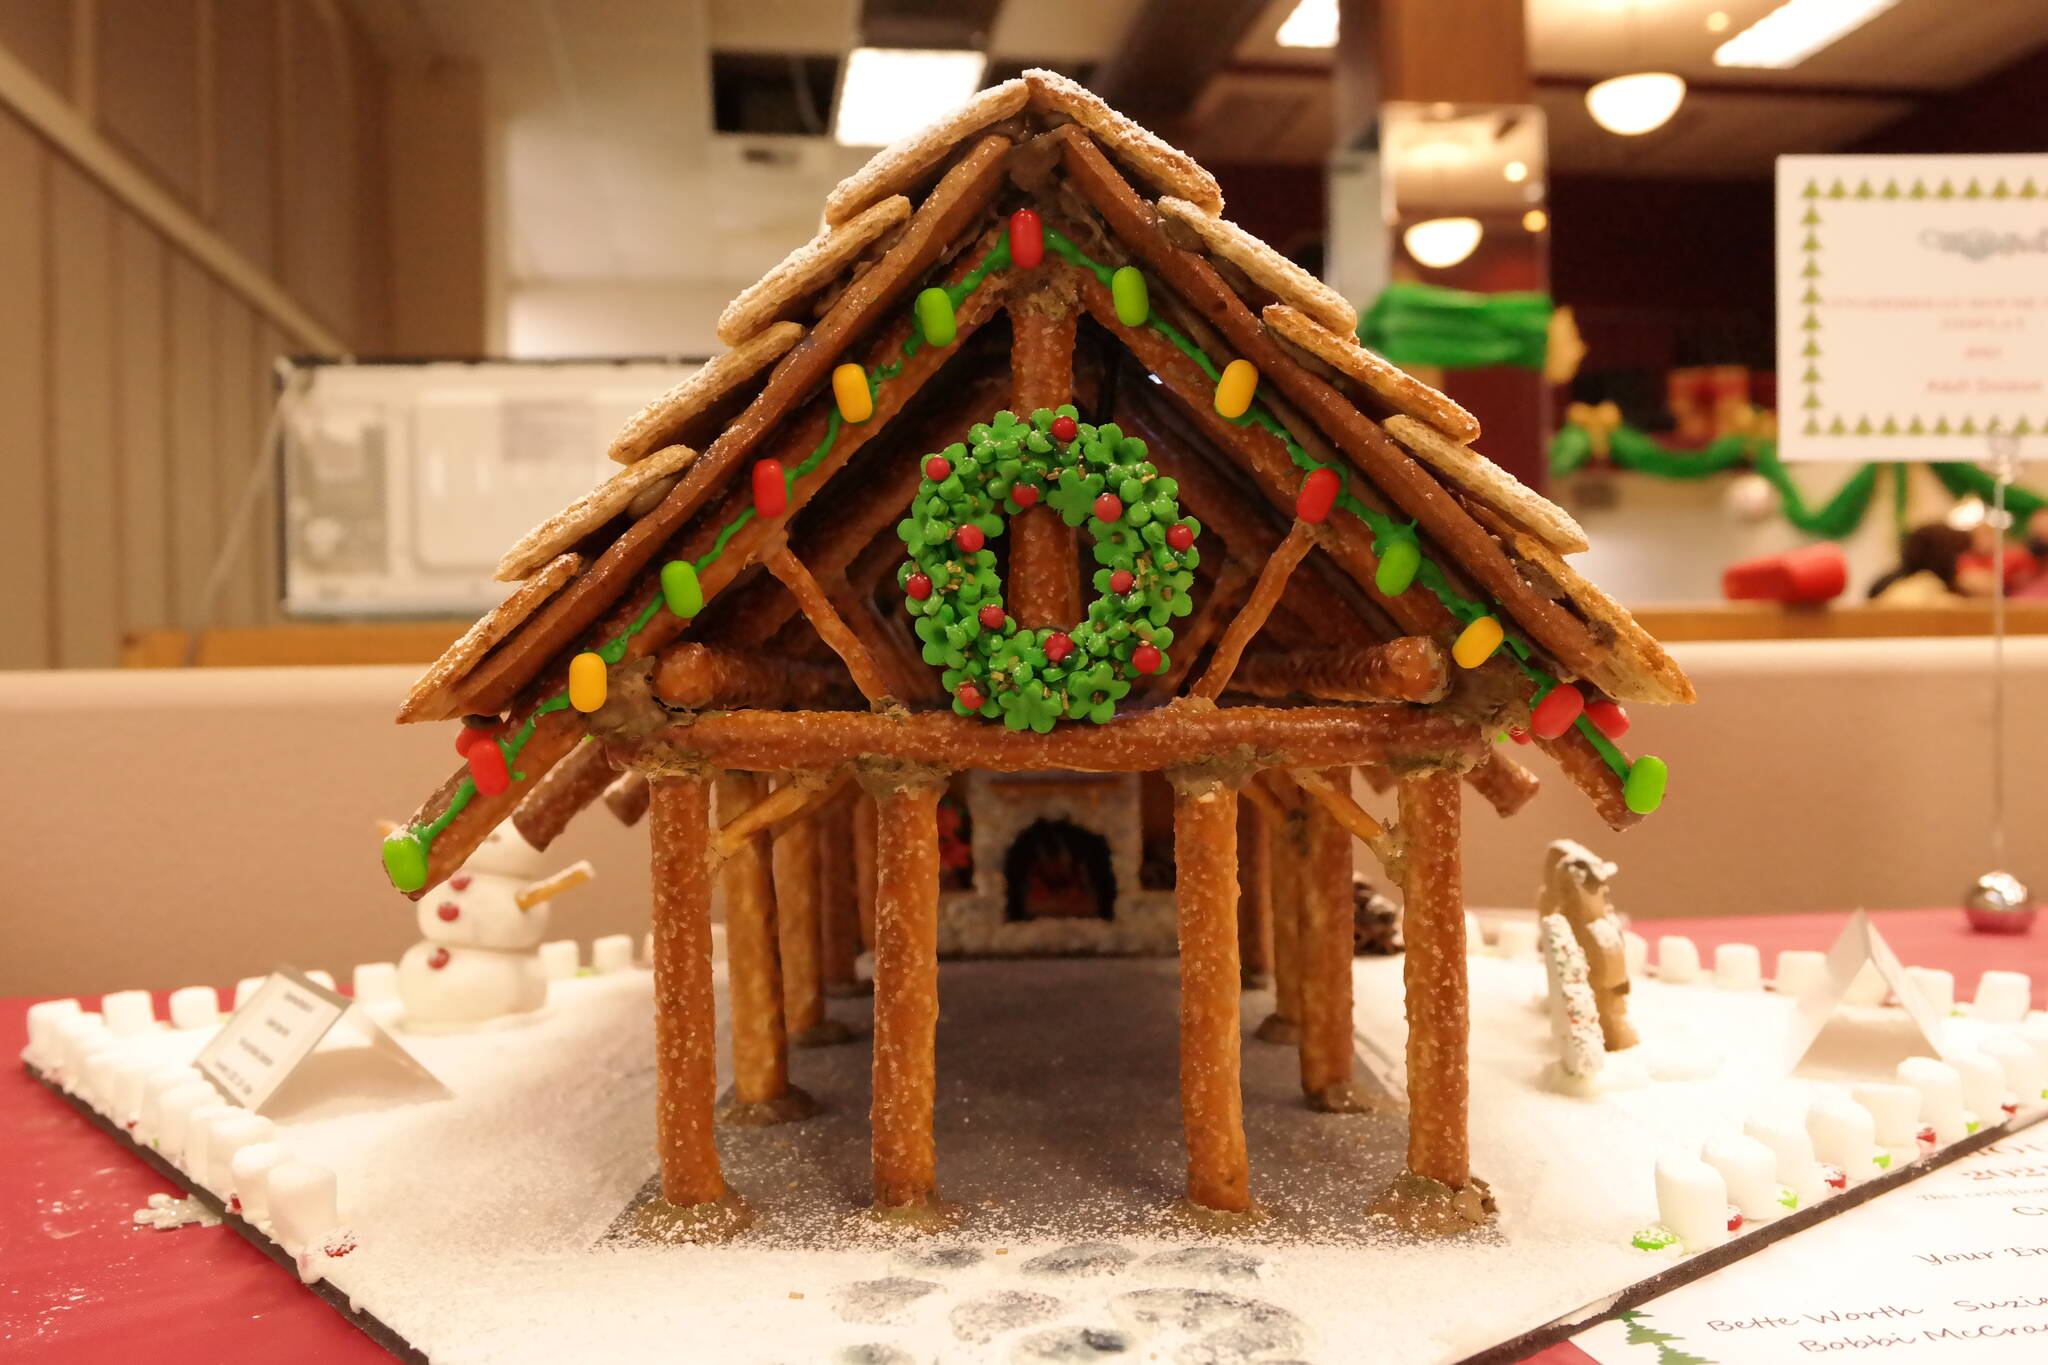 Attendees were able to vote in some gingerbread house competition categories while enjoying live music from local artists.